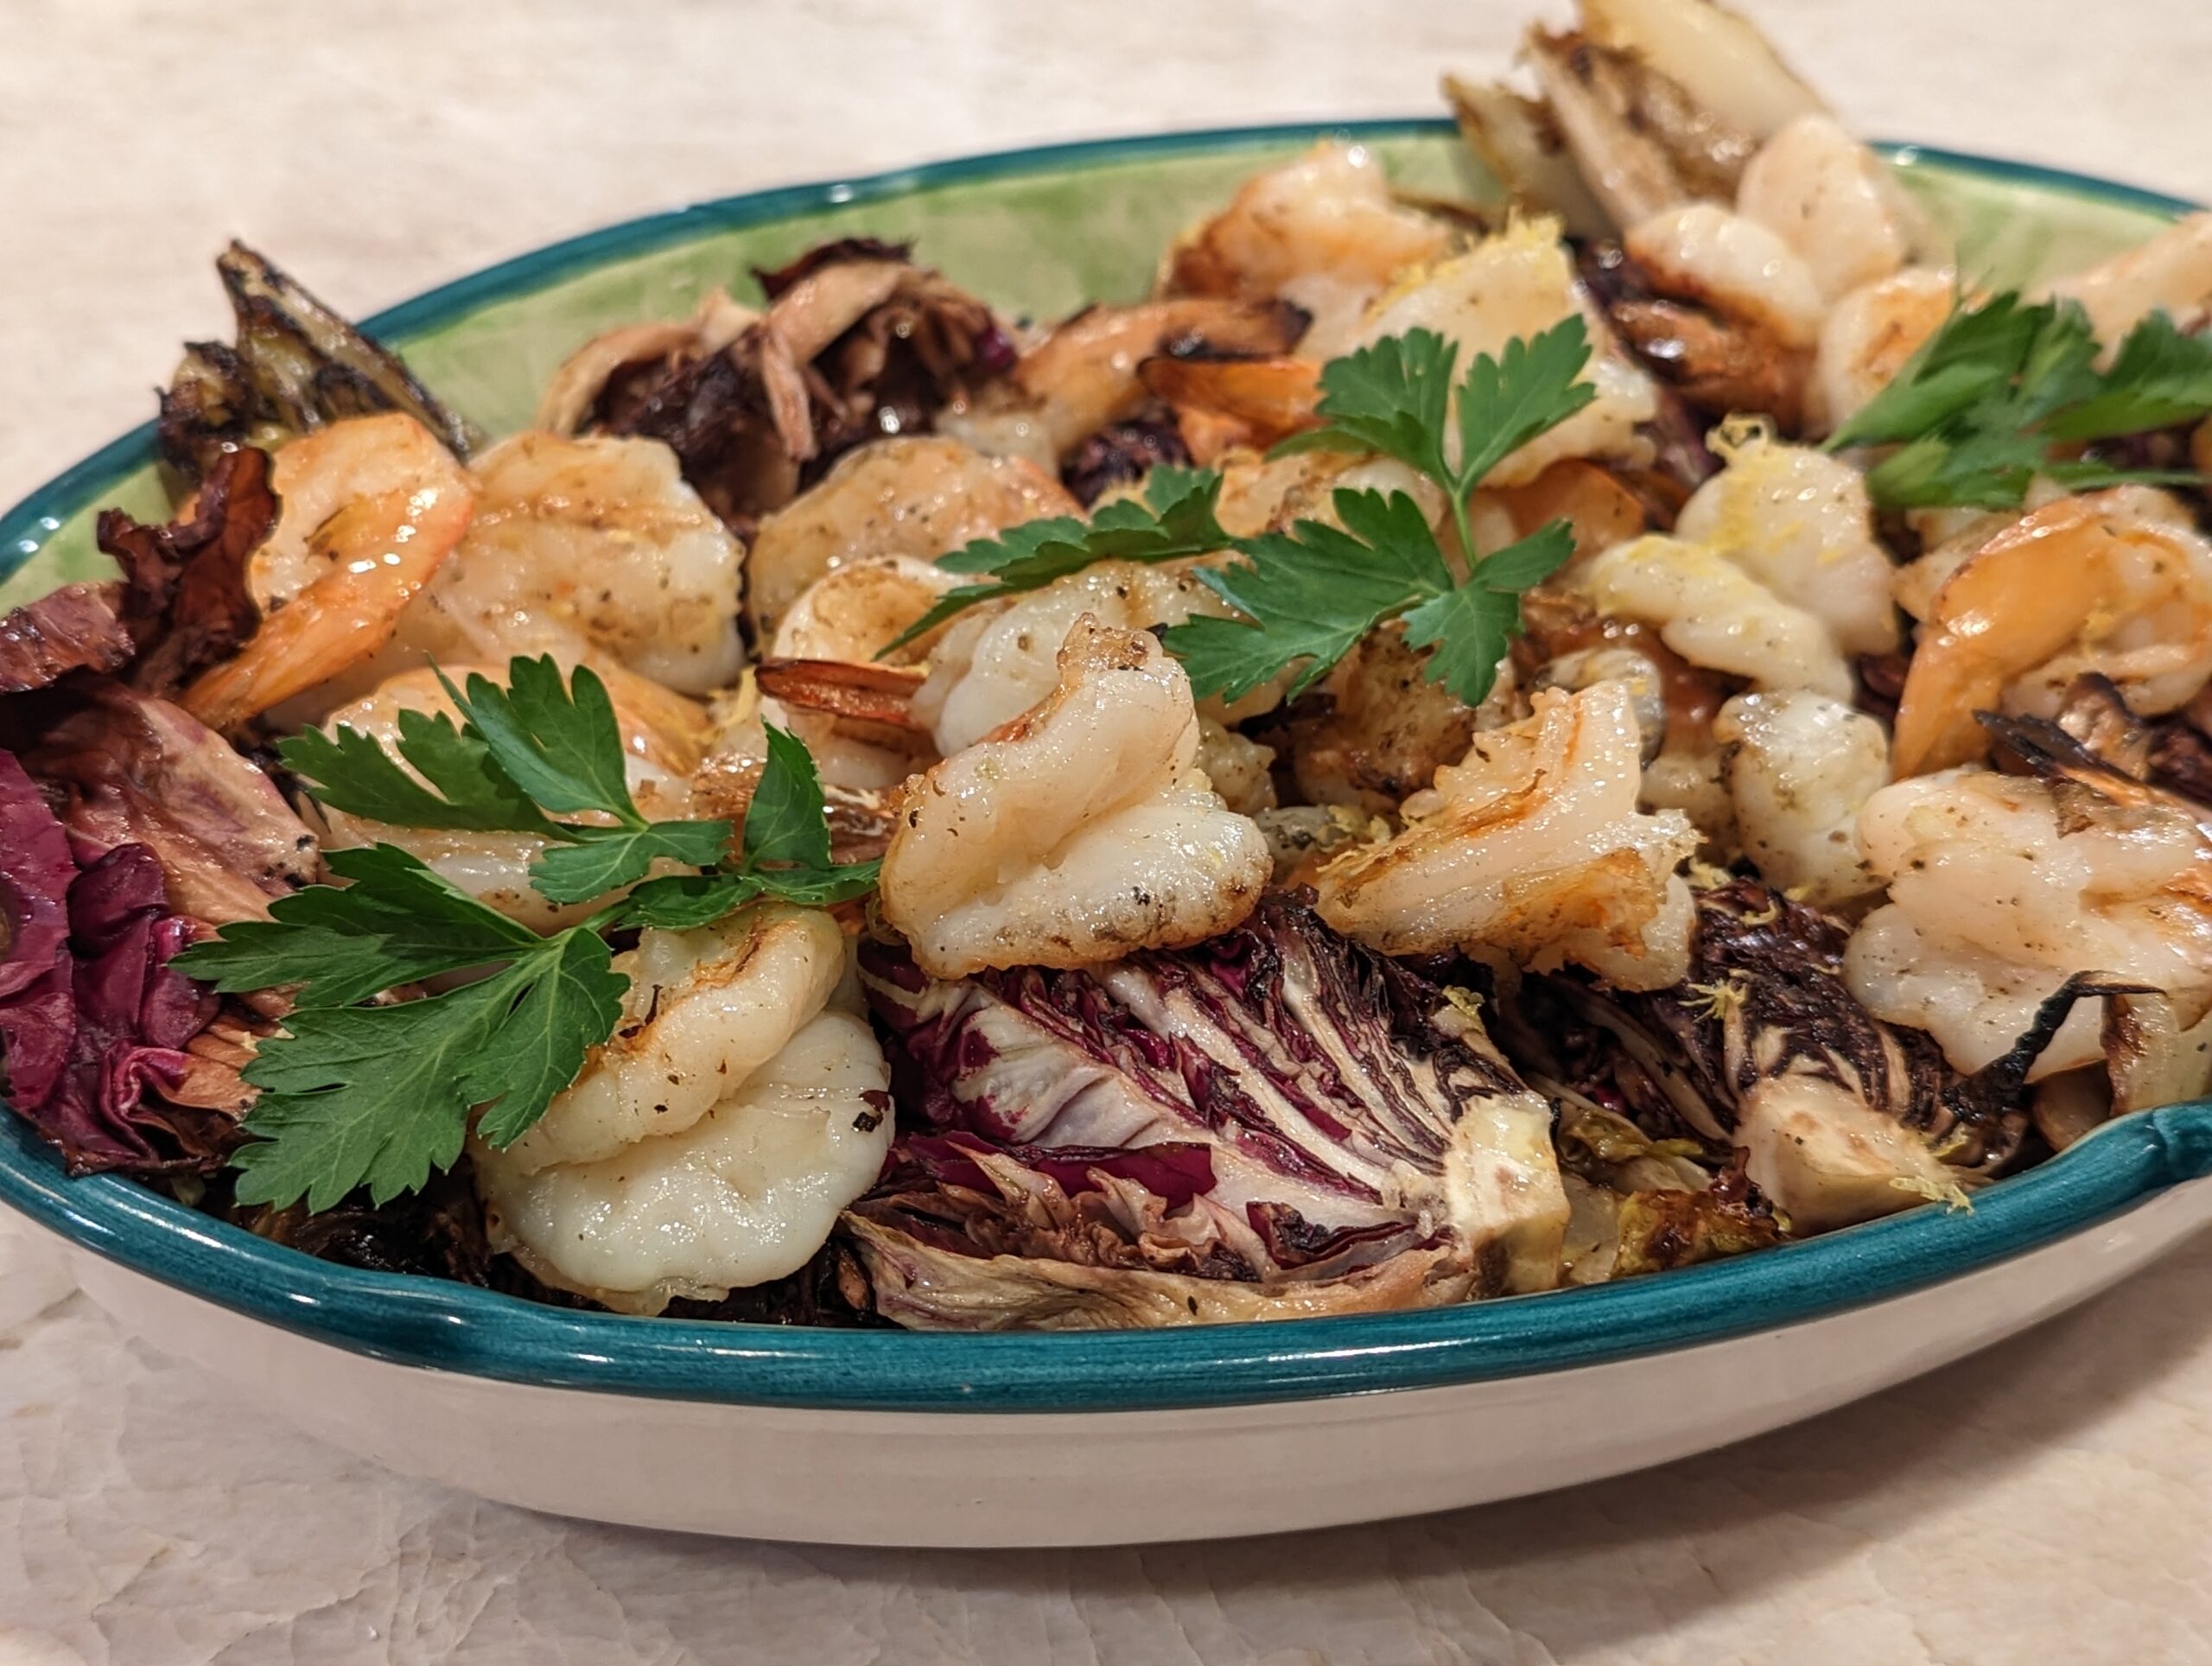 A dish that combines the tender and juicy taste of grilled shrimp with the crisp bitterness of radicchio and endive, topped with balsamic glaze.